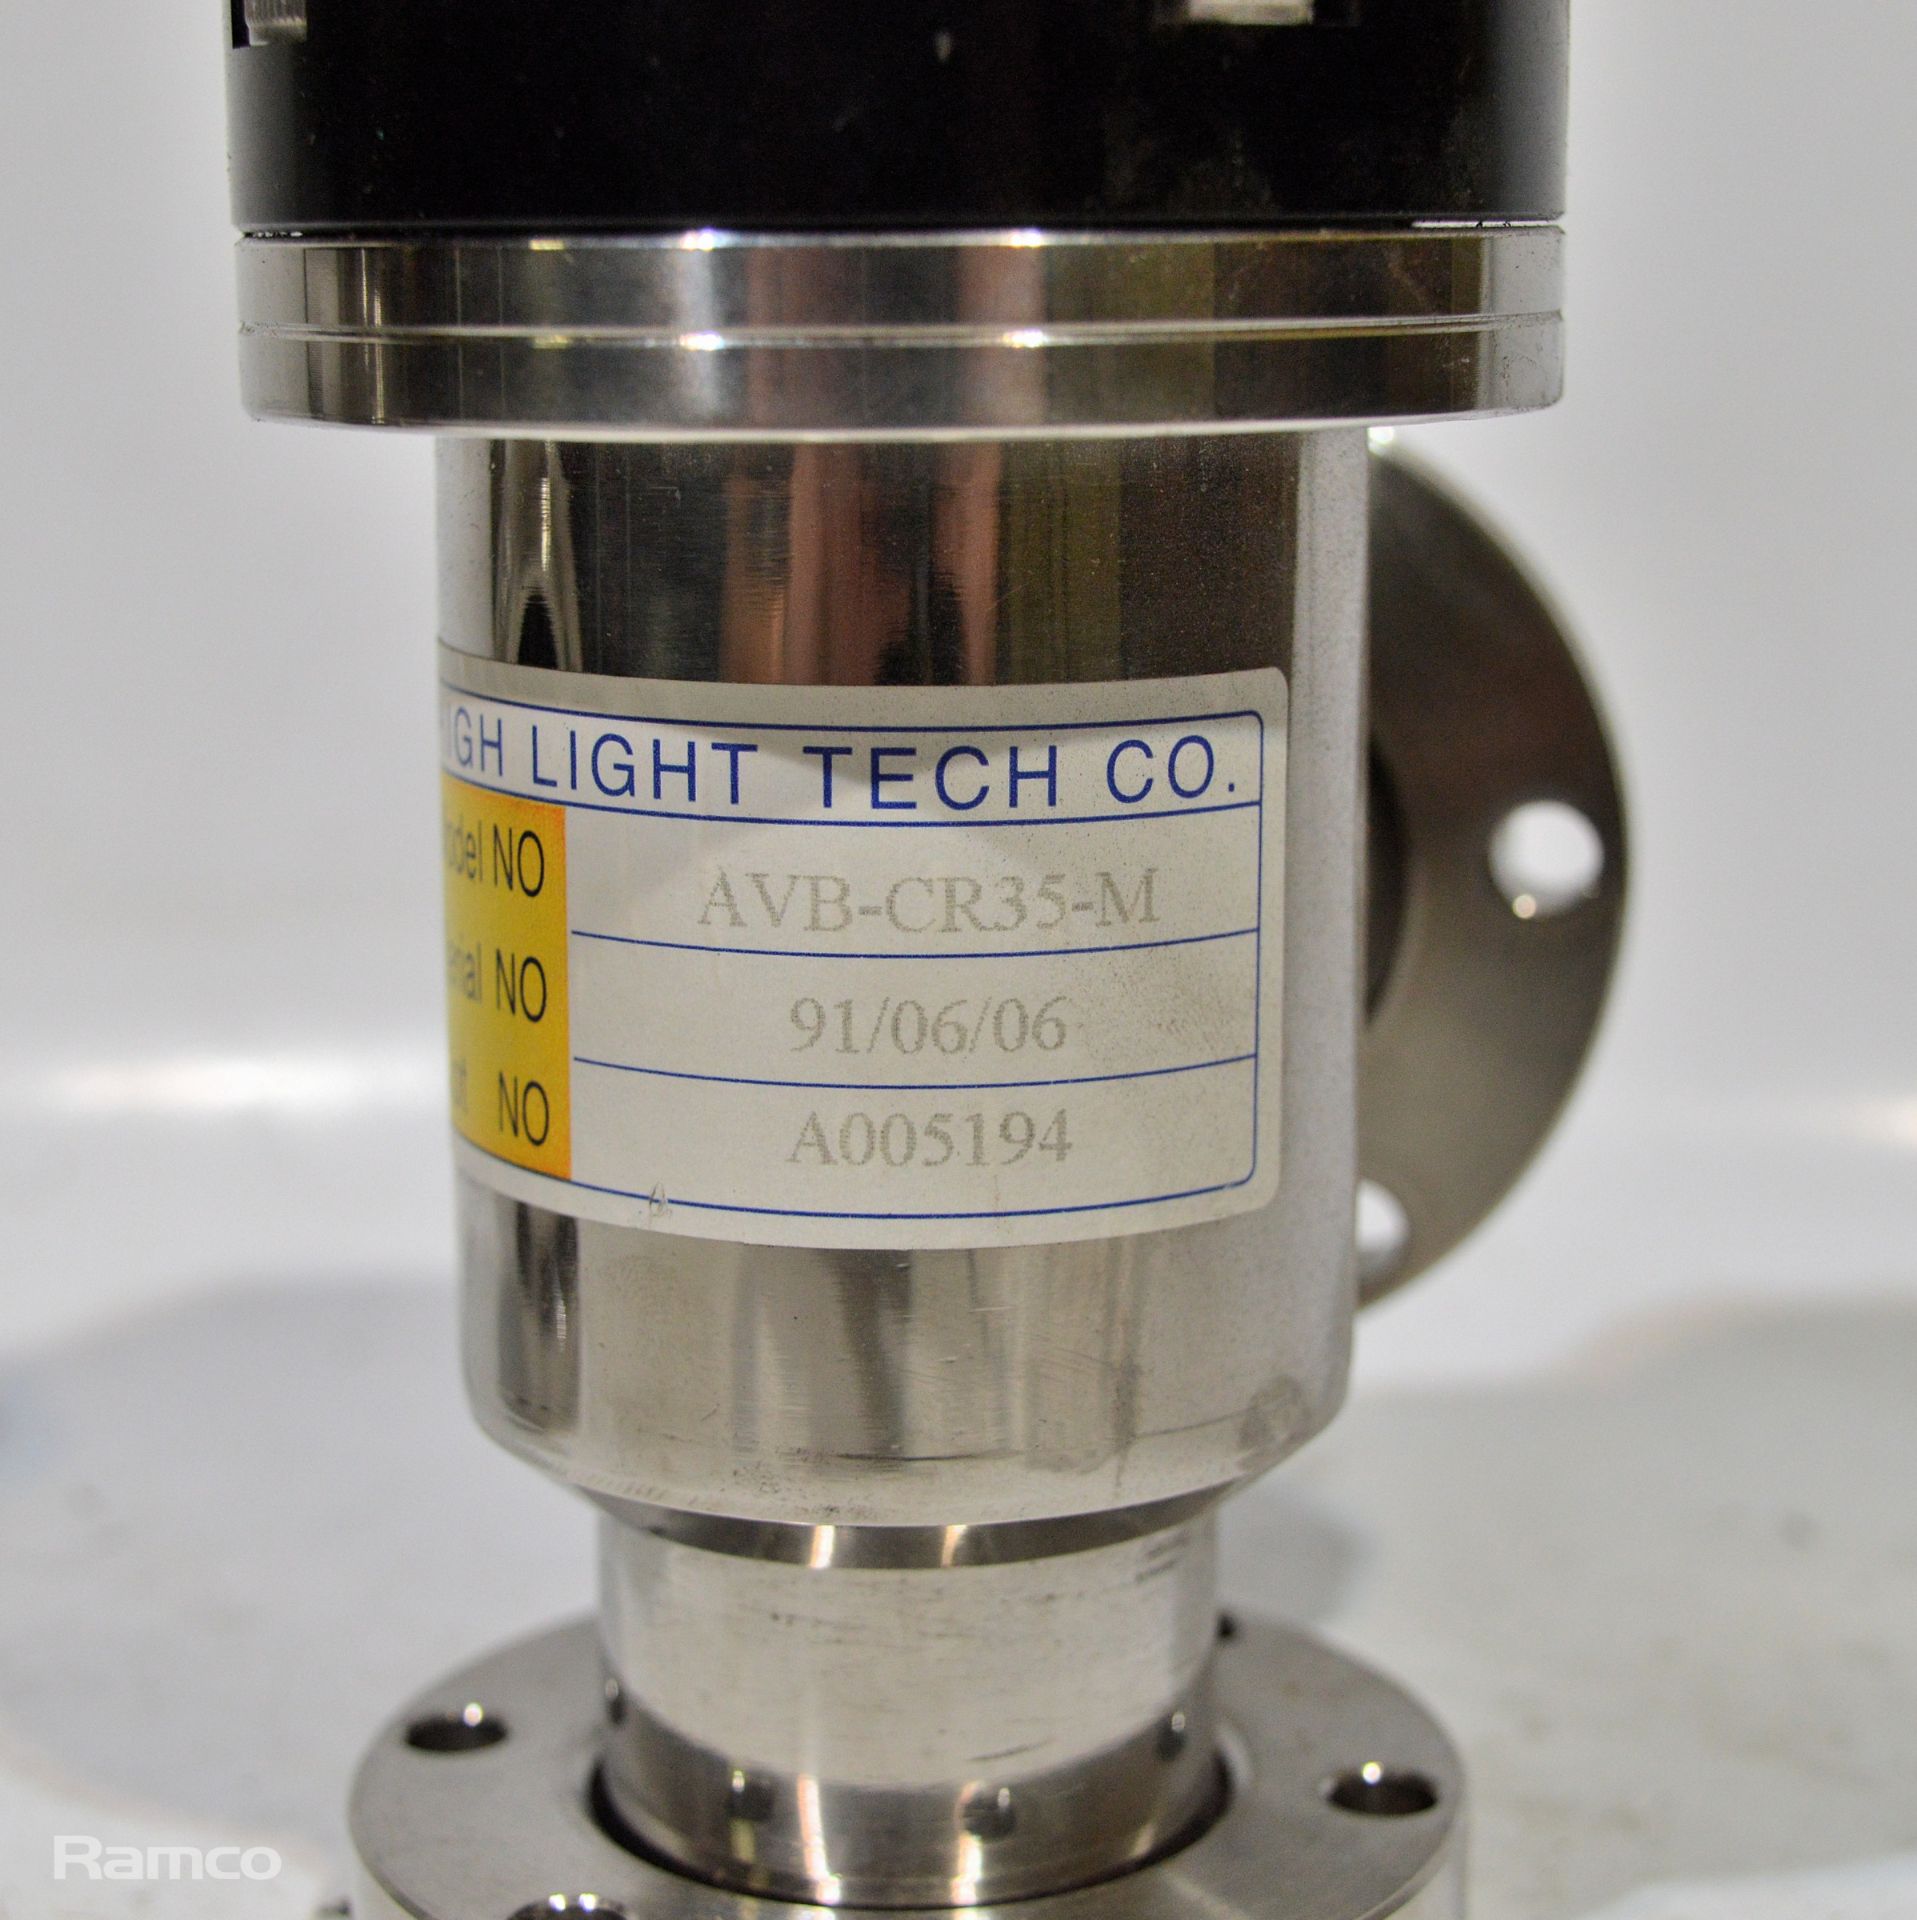 2x Scanwell Conflat Bellows Vacuum Valves - Image 3 of 3